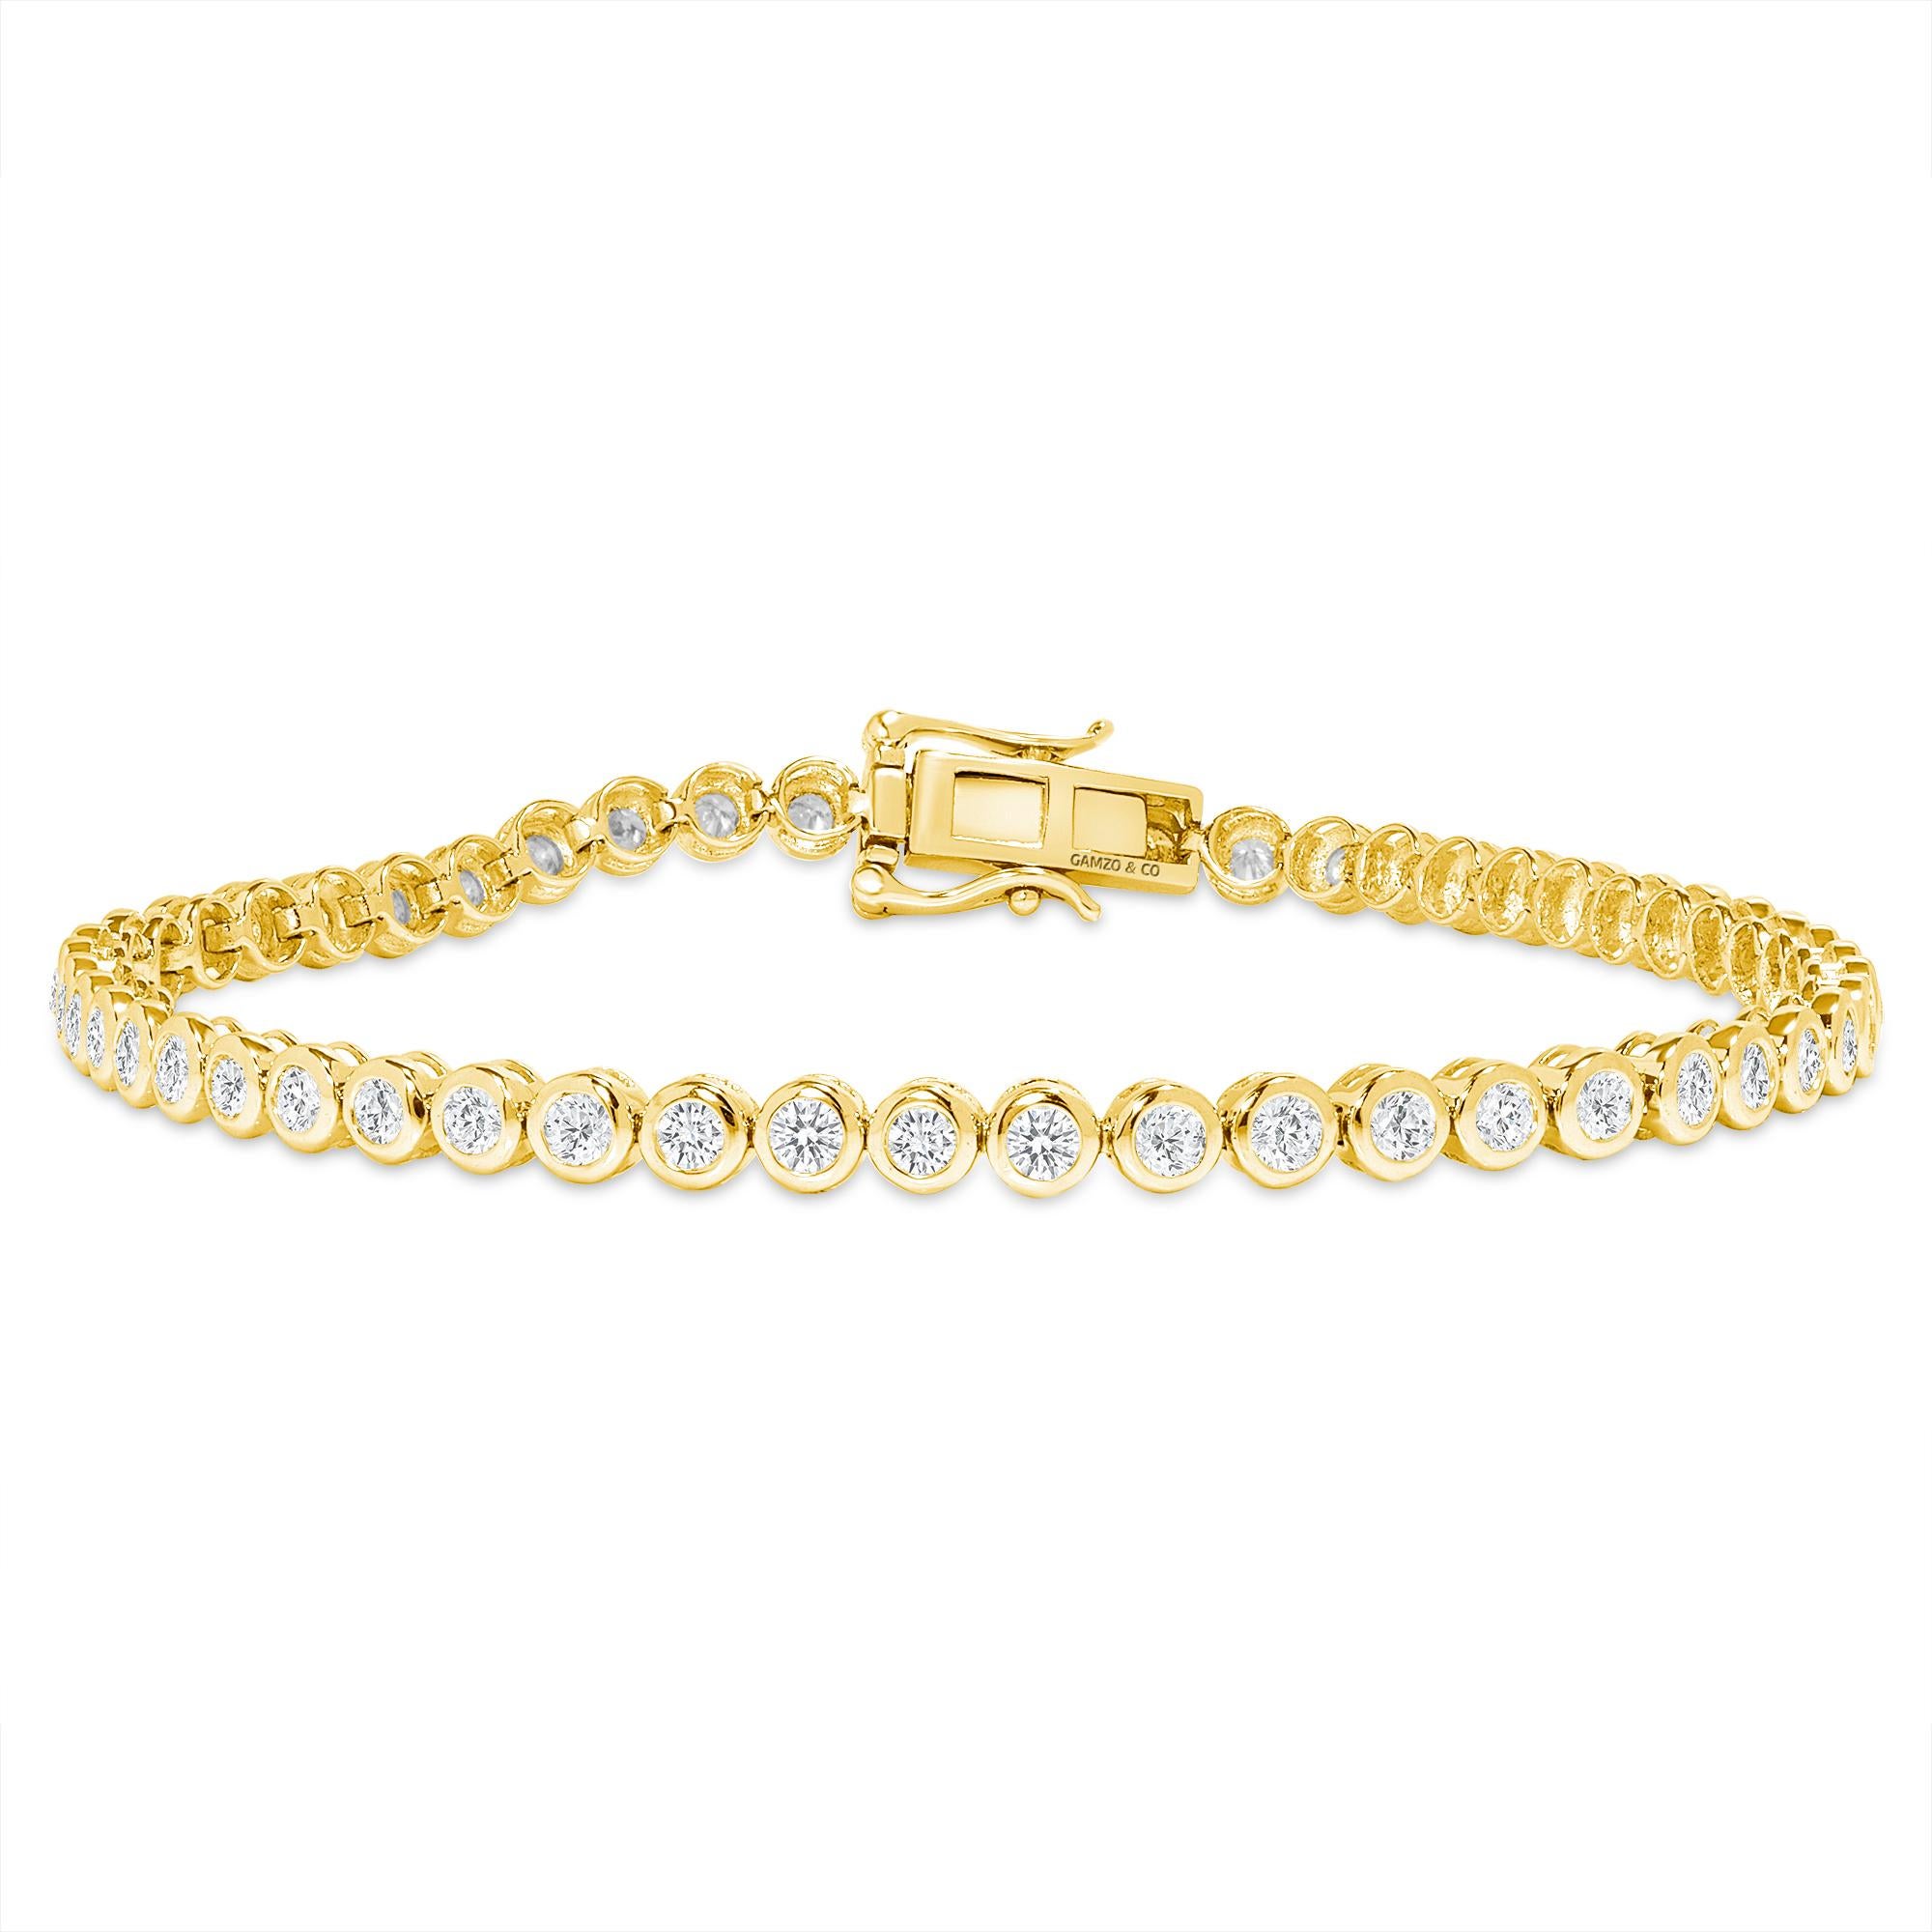 These beautiful round diamonds dance around your wrist as they absorb light and attention.
Metal: 14k Gold
Diamond Cut: Round
Diamond Total Carats: 3ct
Diamond Clarity: VS
Diamond Color: F
Color: Yellow Gold
Bracelet Length: 5 Inches 
Included with